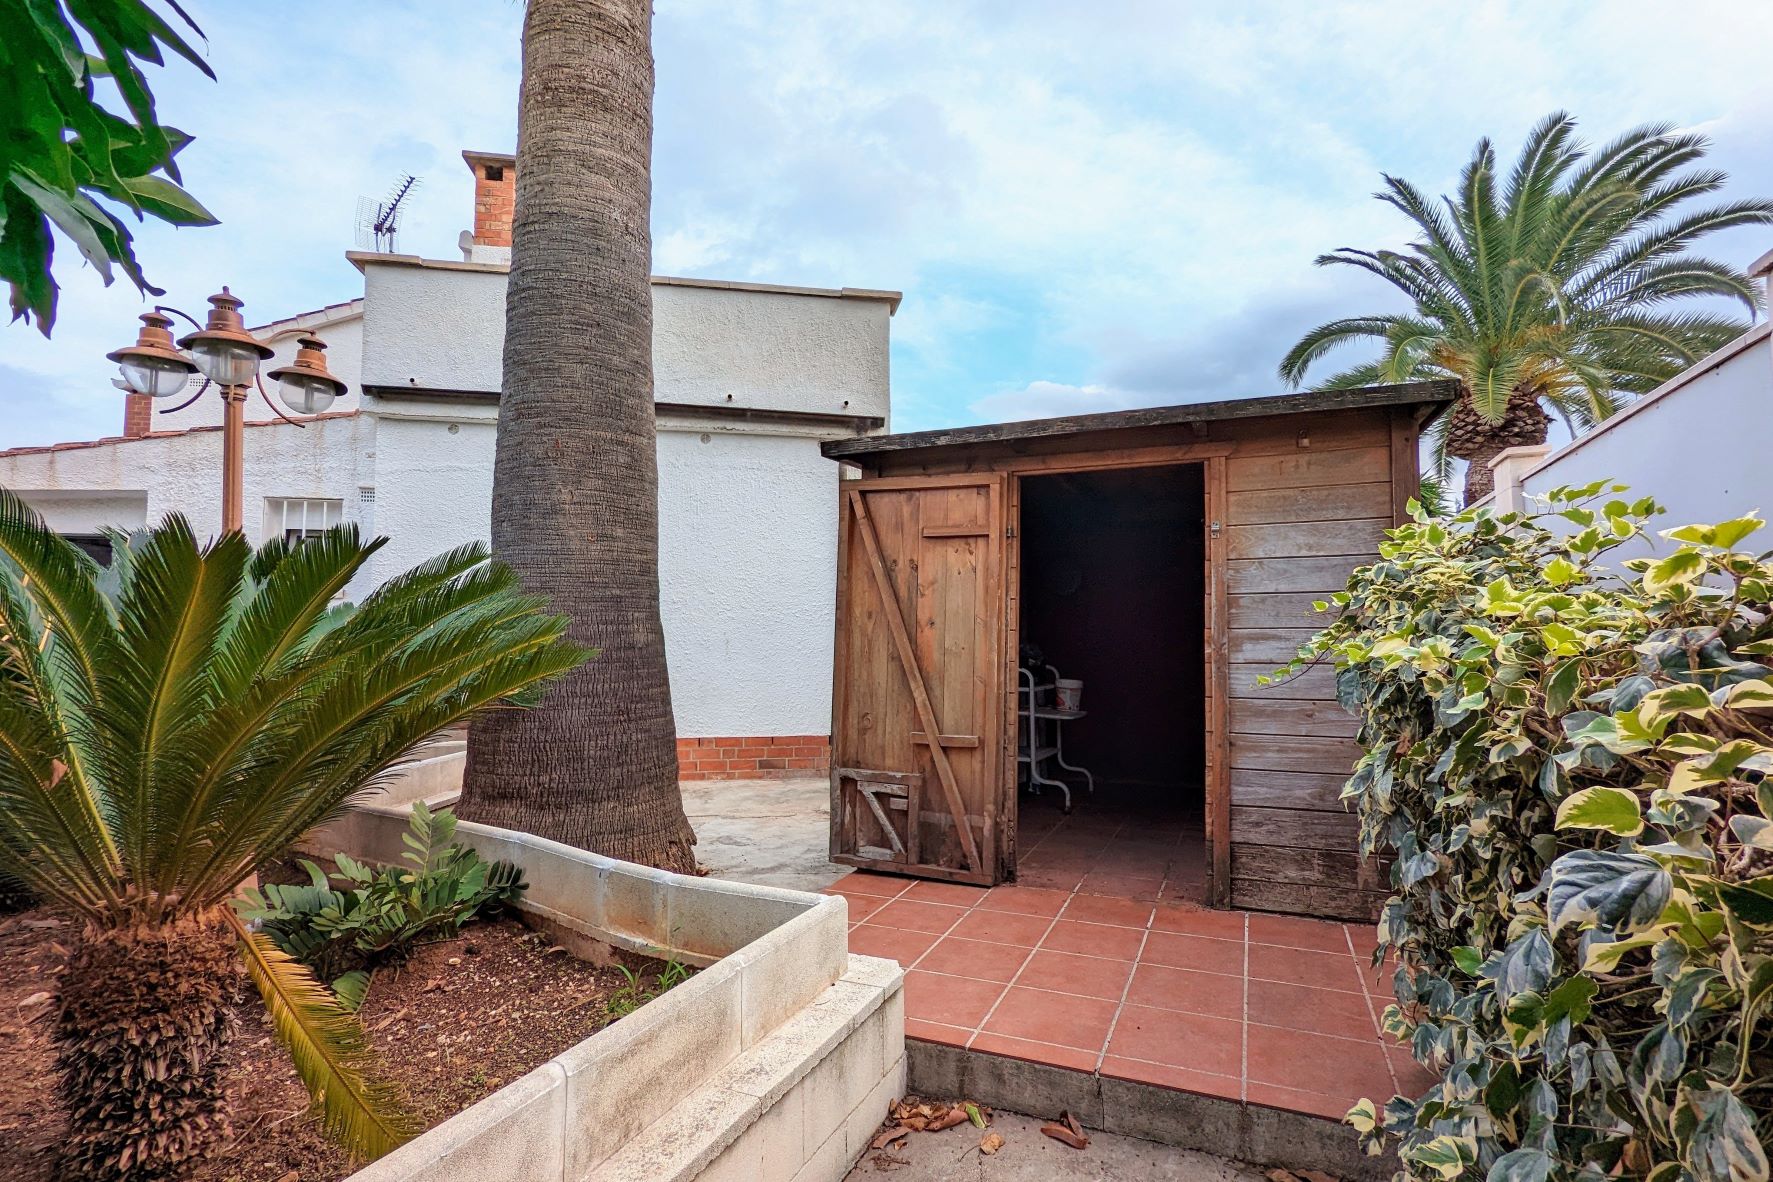 Great villa for sale in Els Poblets. This spacious house has plenty of space to have